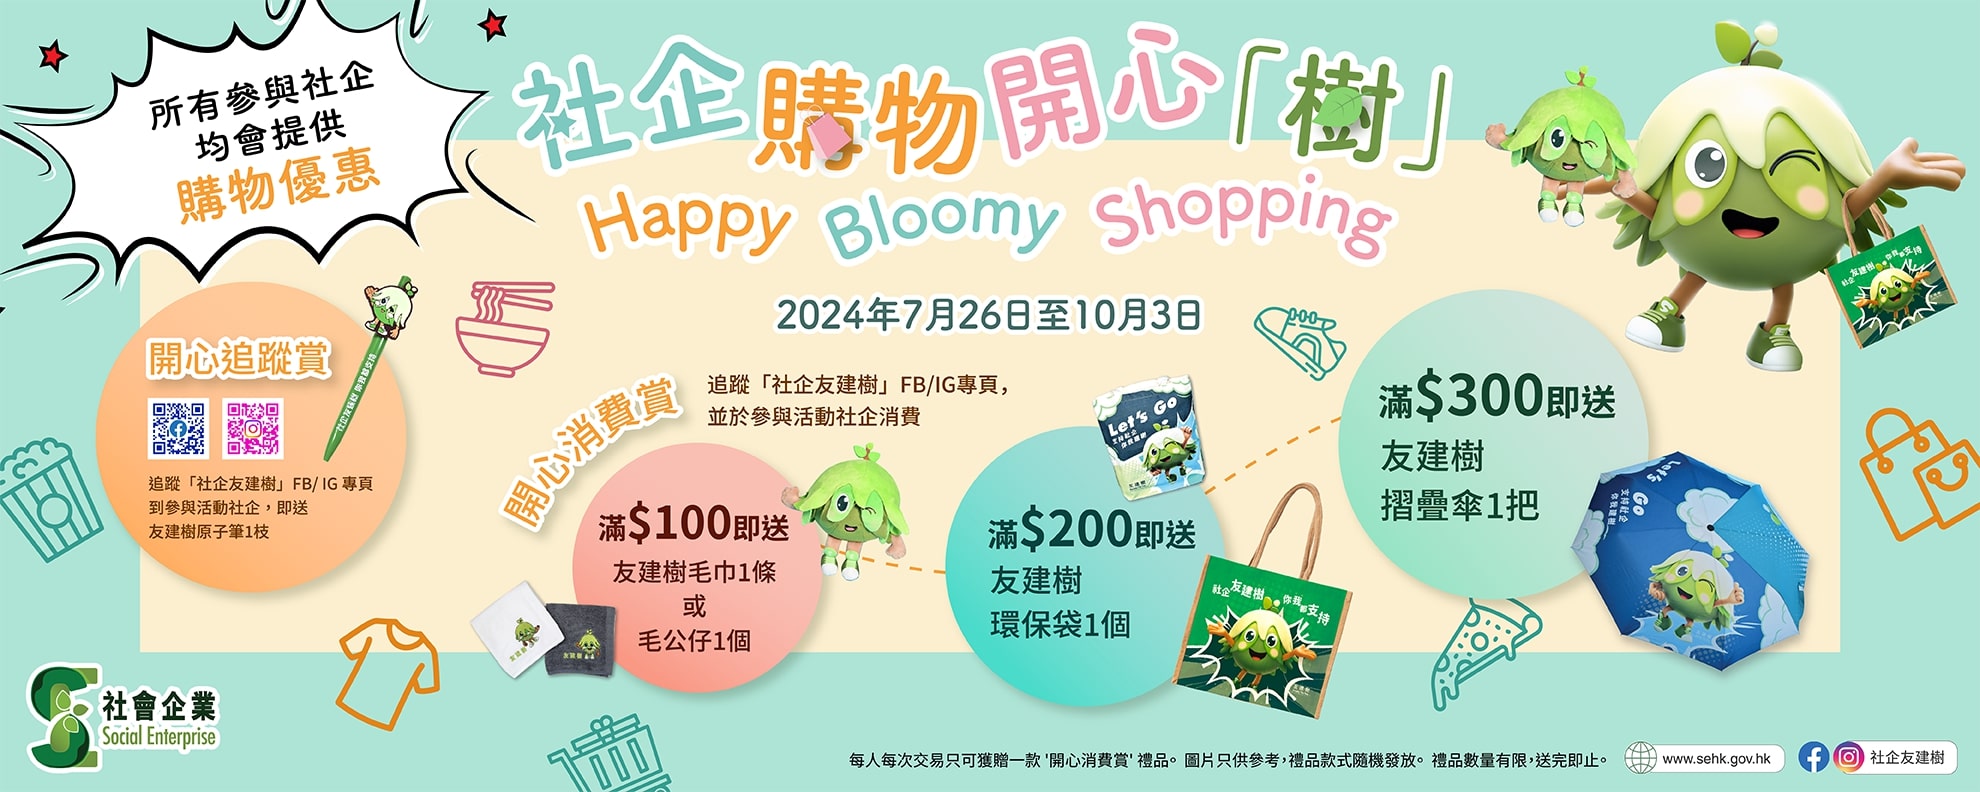 Happy Bloomy Shopping Promotion